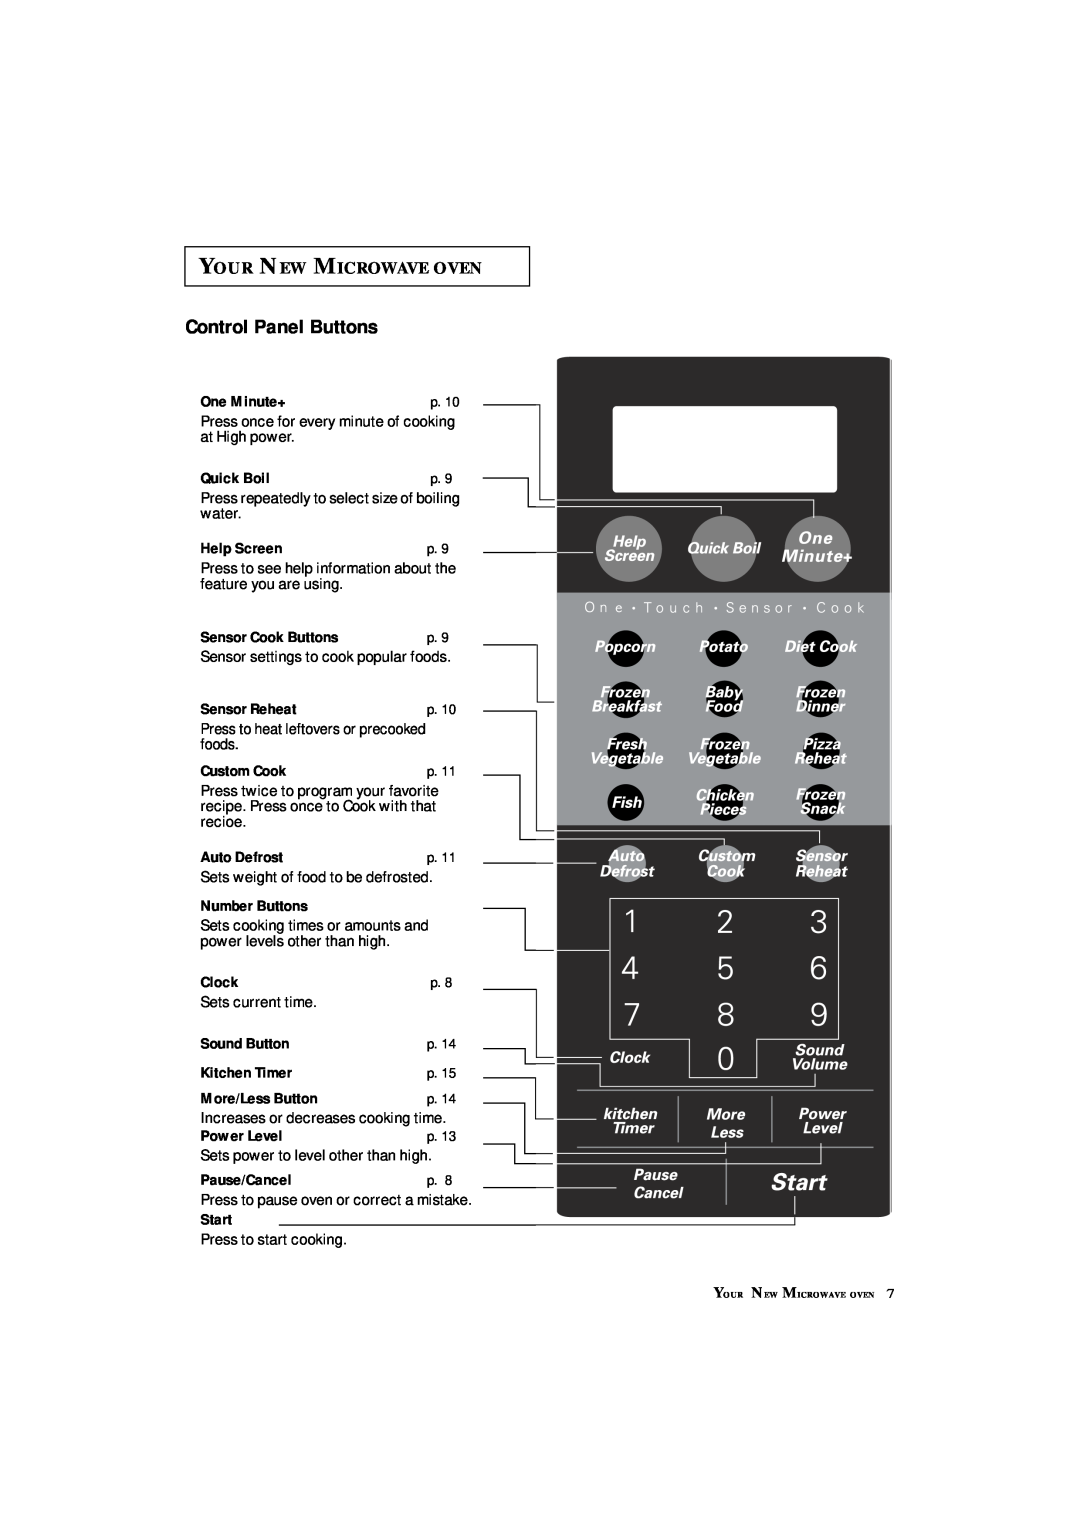 Samsung MS8899S manual Control Panel Buttons, Your New Microwave Oven 